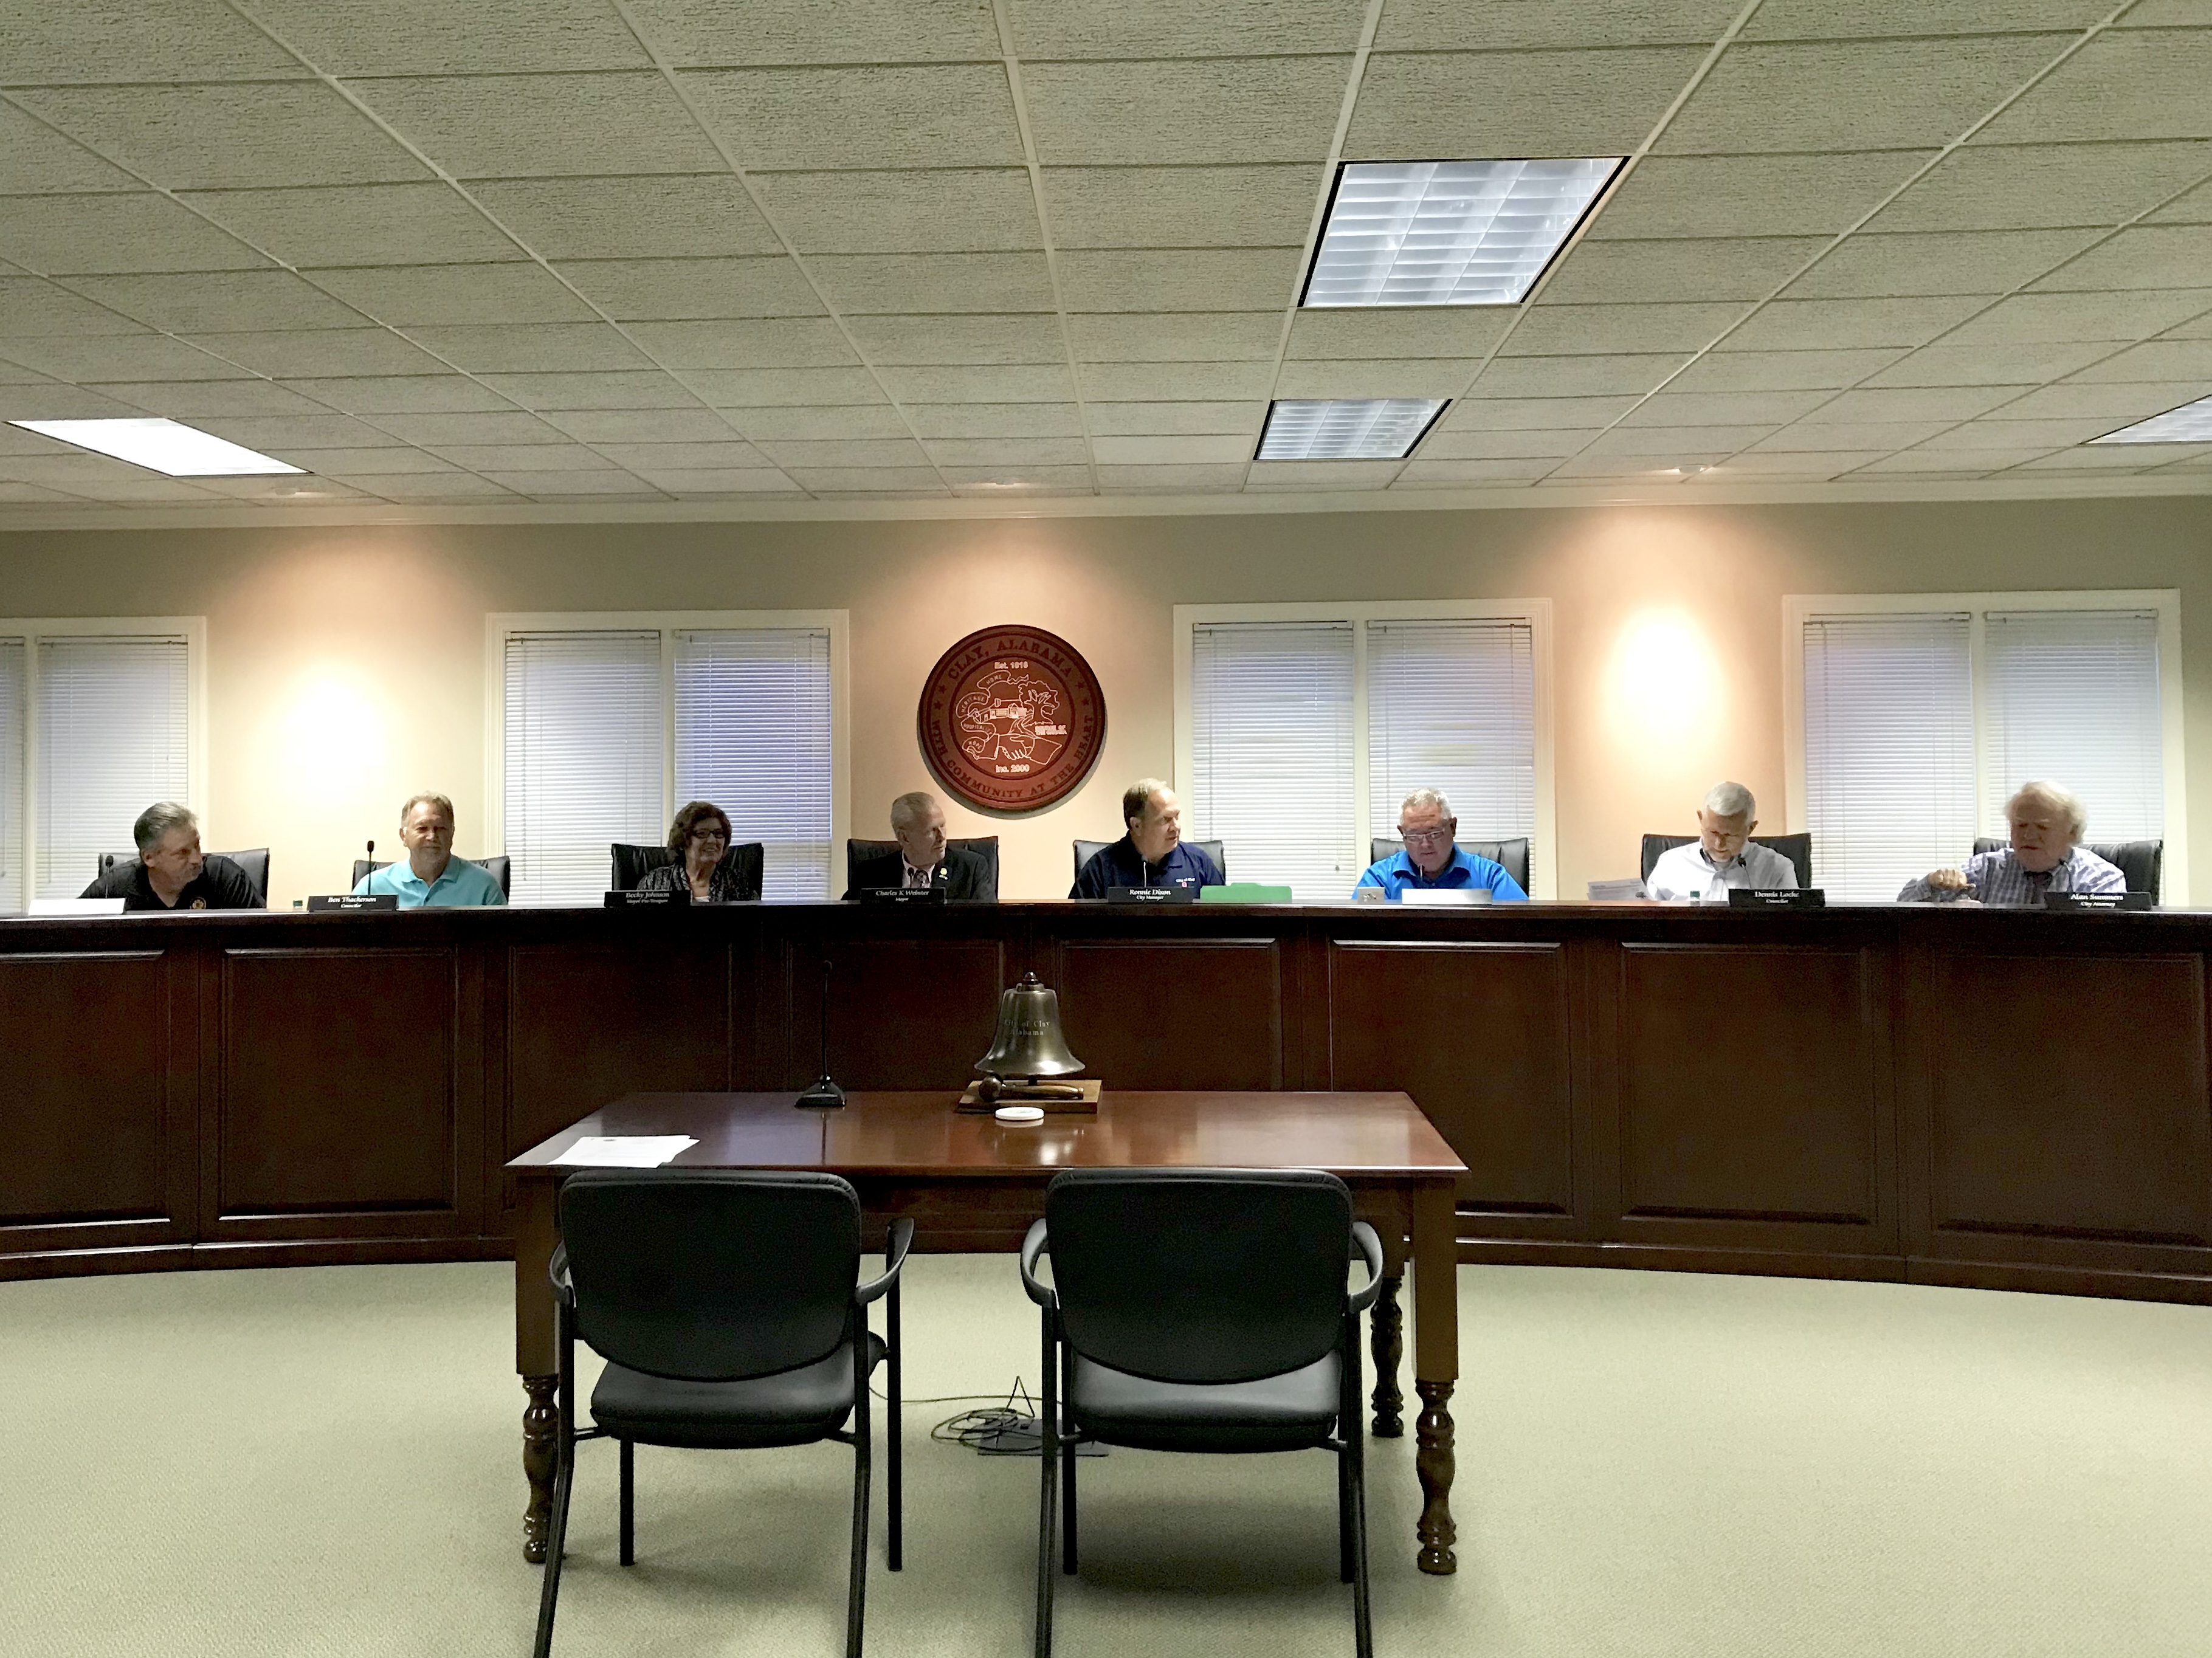 City of Clay adds $100K to payroll due to difficulties recruiting employees